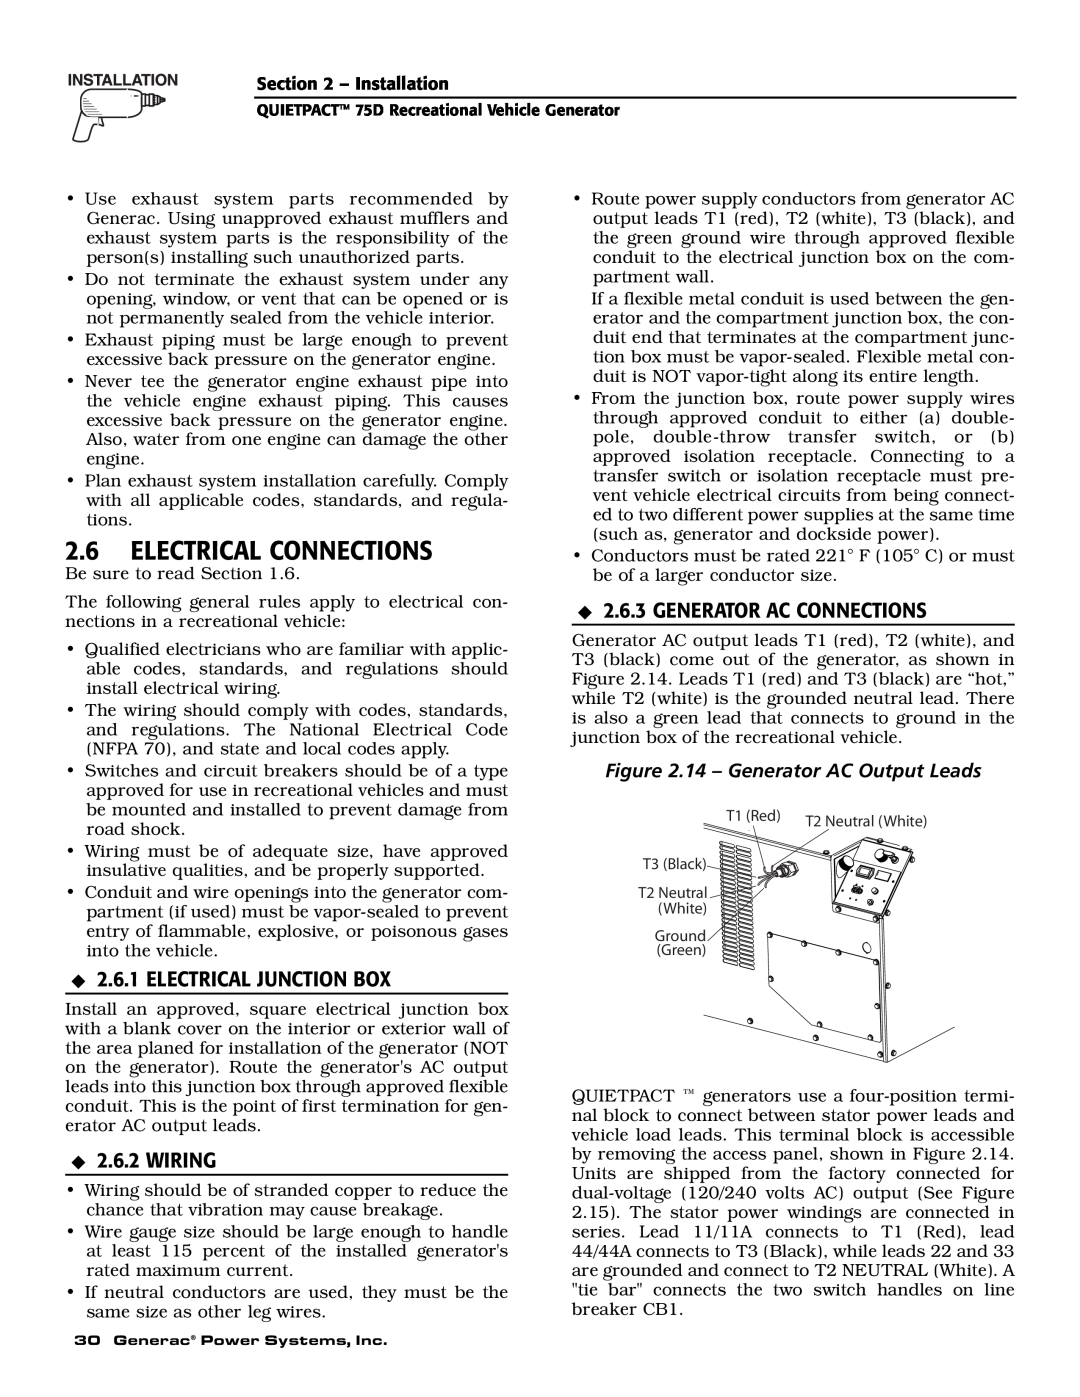 Guardian Technologies 004270-2 Electrical Connections, Electrical Junction Box, Wiring, Generator Ac Connections 